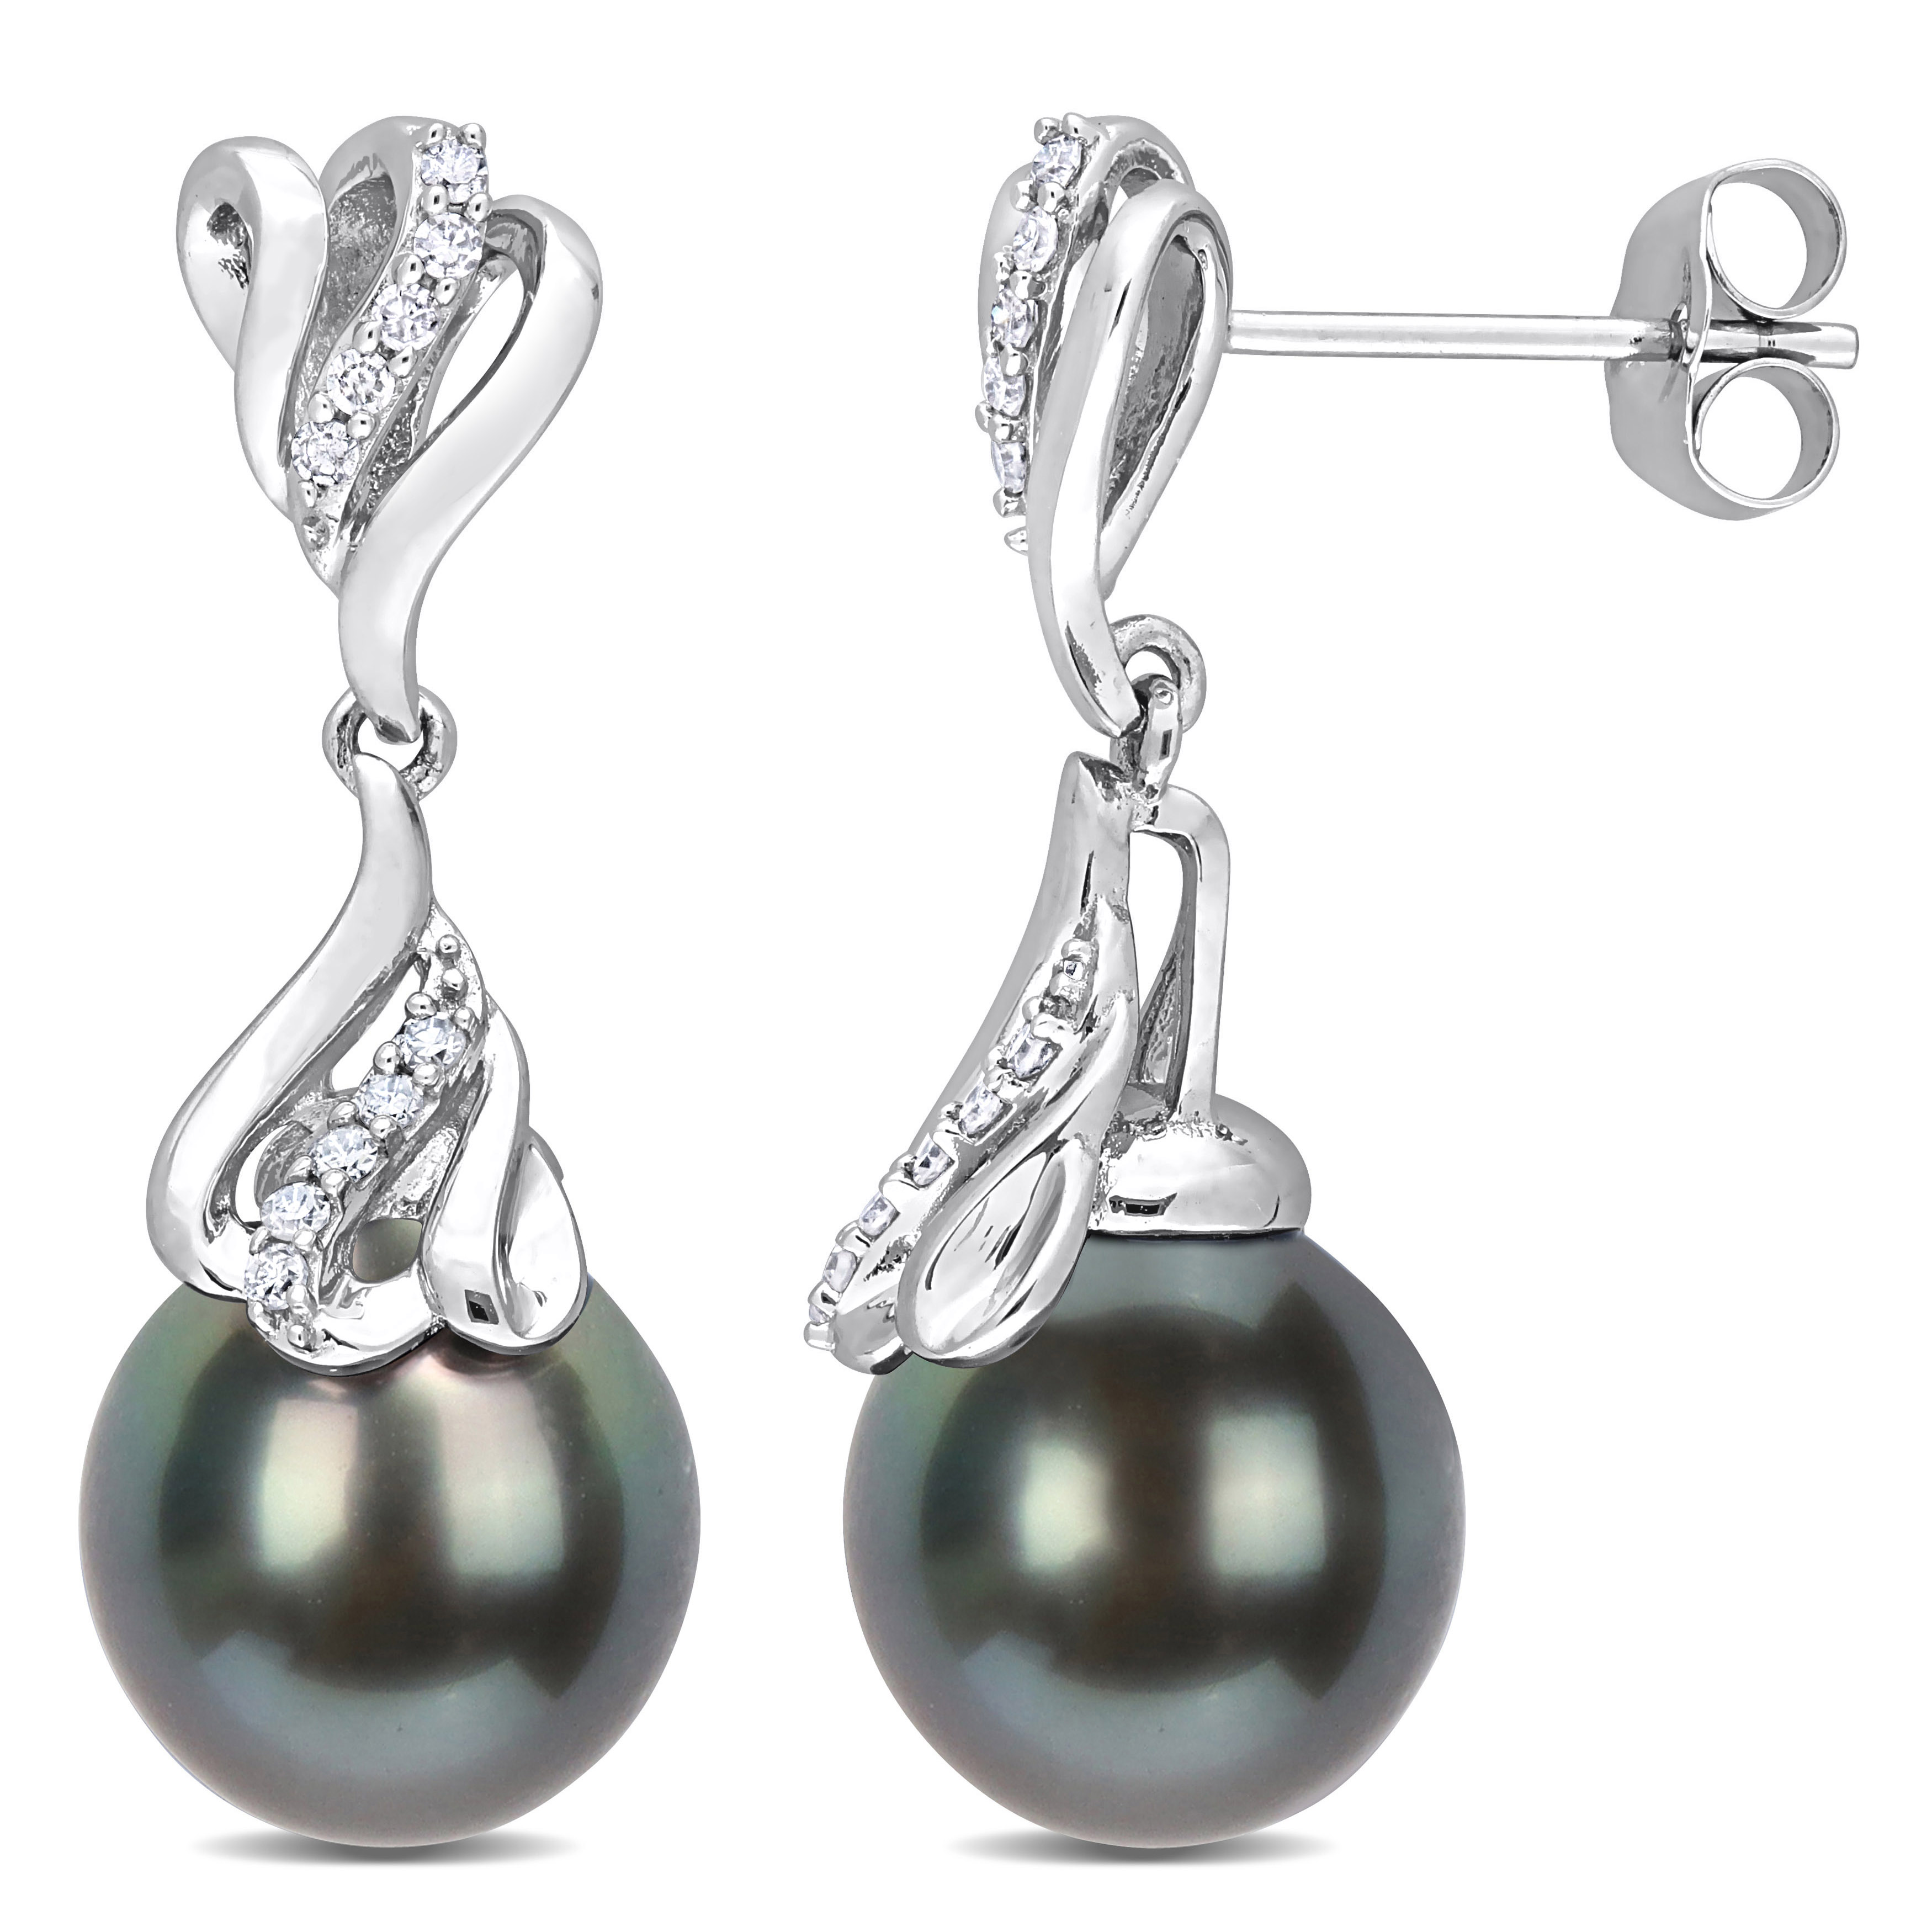 9-10 MM Black Tahitian Cultured Pearl and 1/8 CT TW Diamond Dangle Earrings in 14k White Gold